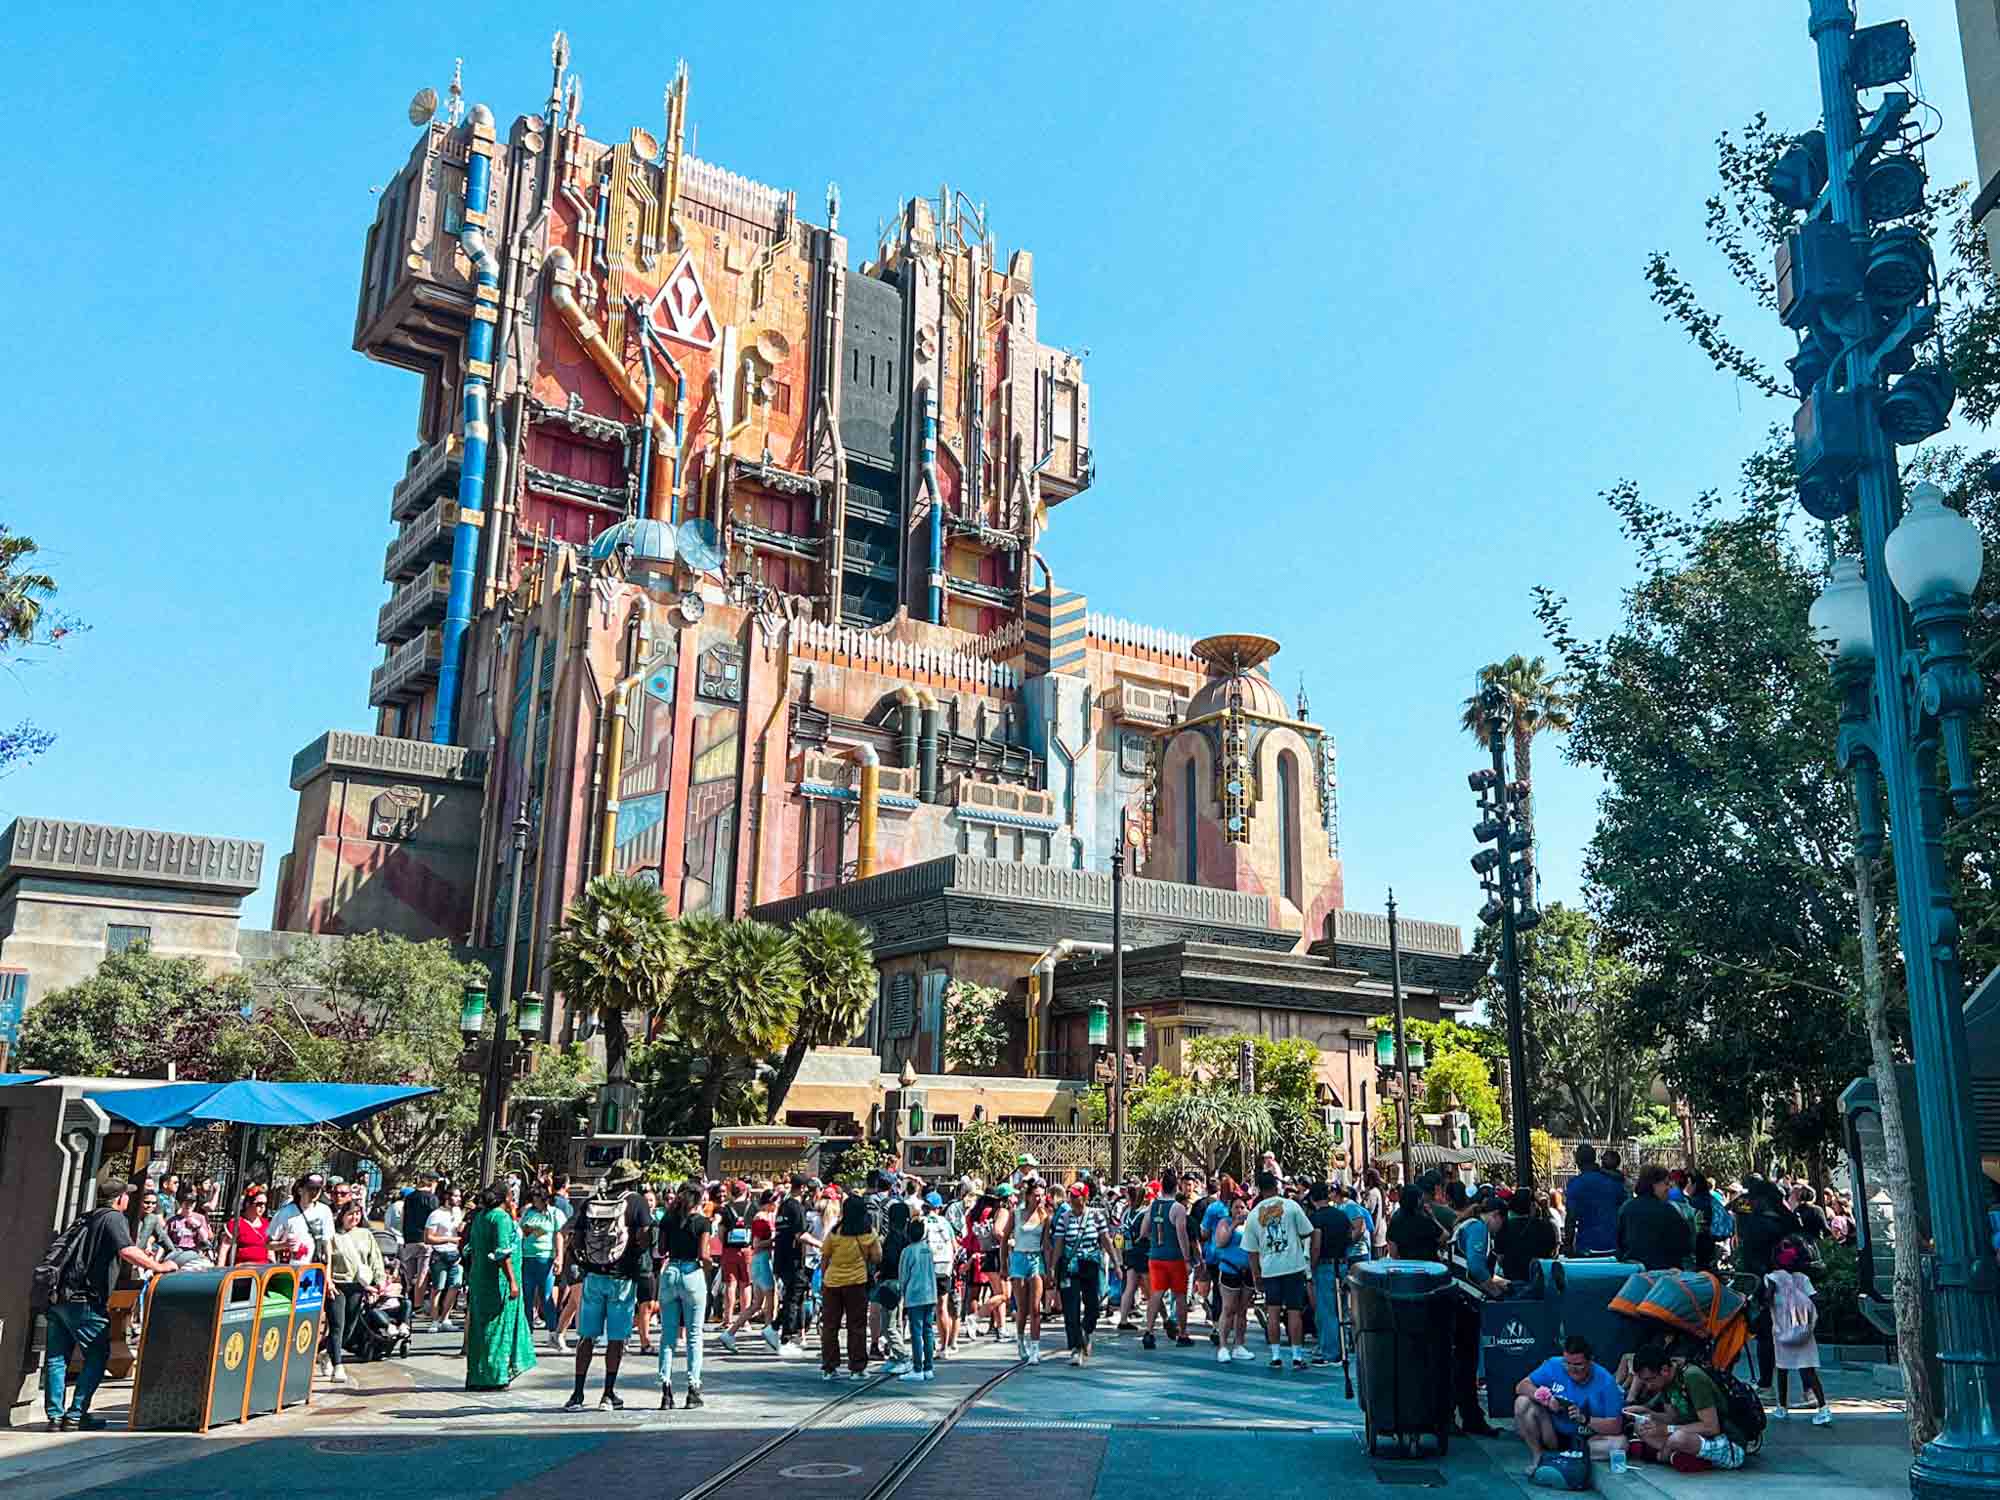 Guardians of the Galaxy Mission Breakout.